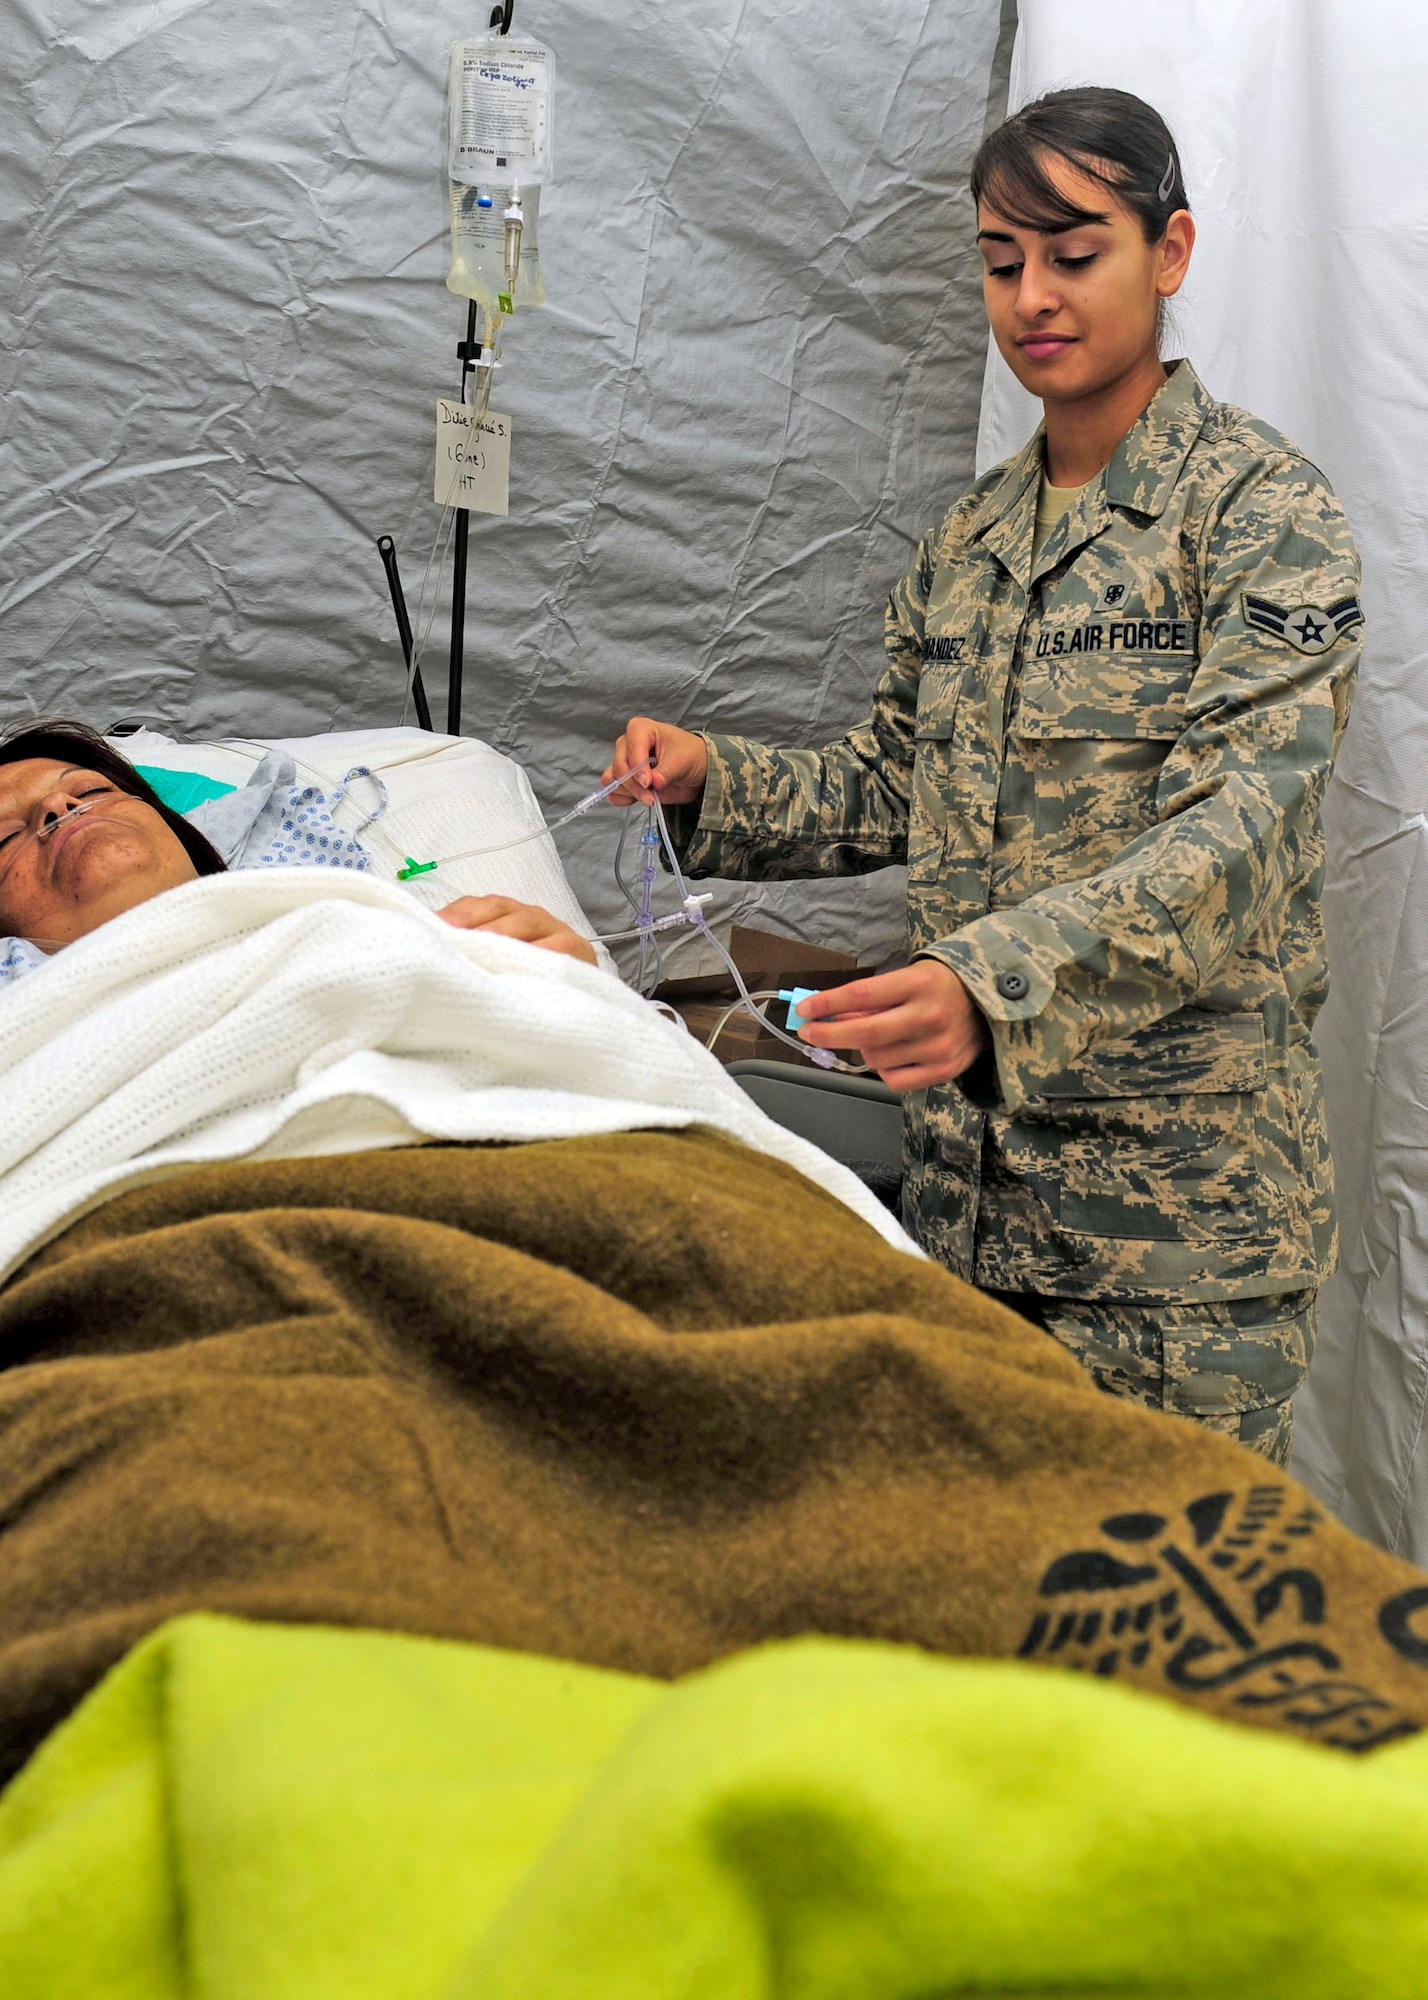 Airman 1st Class Yadira Fernandez adjusts a patient's intravenous line at an expeditionary hospital March 17, 2010, in Angol, Chile. Airman Fernandez is an aerospace medical technician also working as a translator for the Air Force Expeditionary Medical Support team here. She is deployed from the 59th Medical Inpatient Squadron at Lackland Air Force Base, Texas. (U.S. Air Force photo/Senior Airman Tiffany Trojca)
